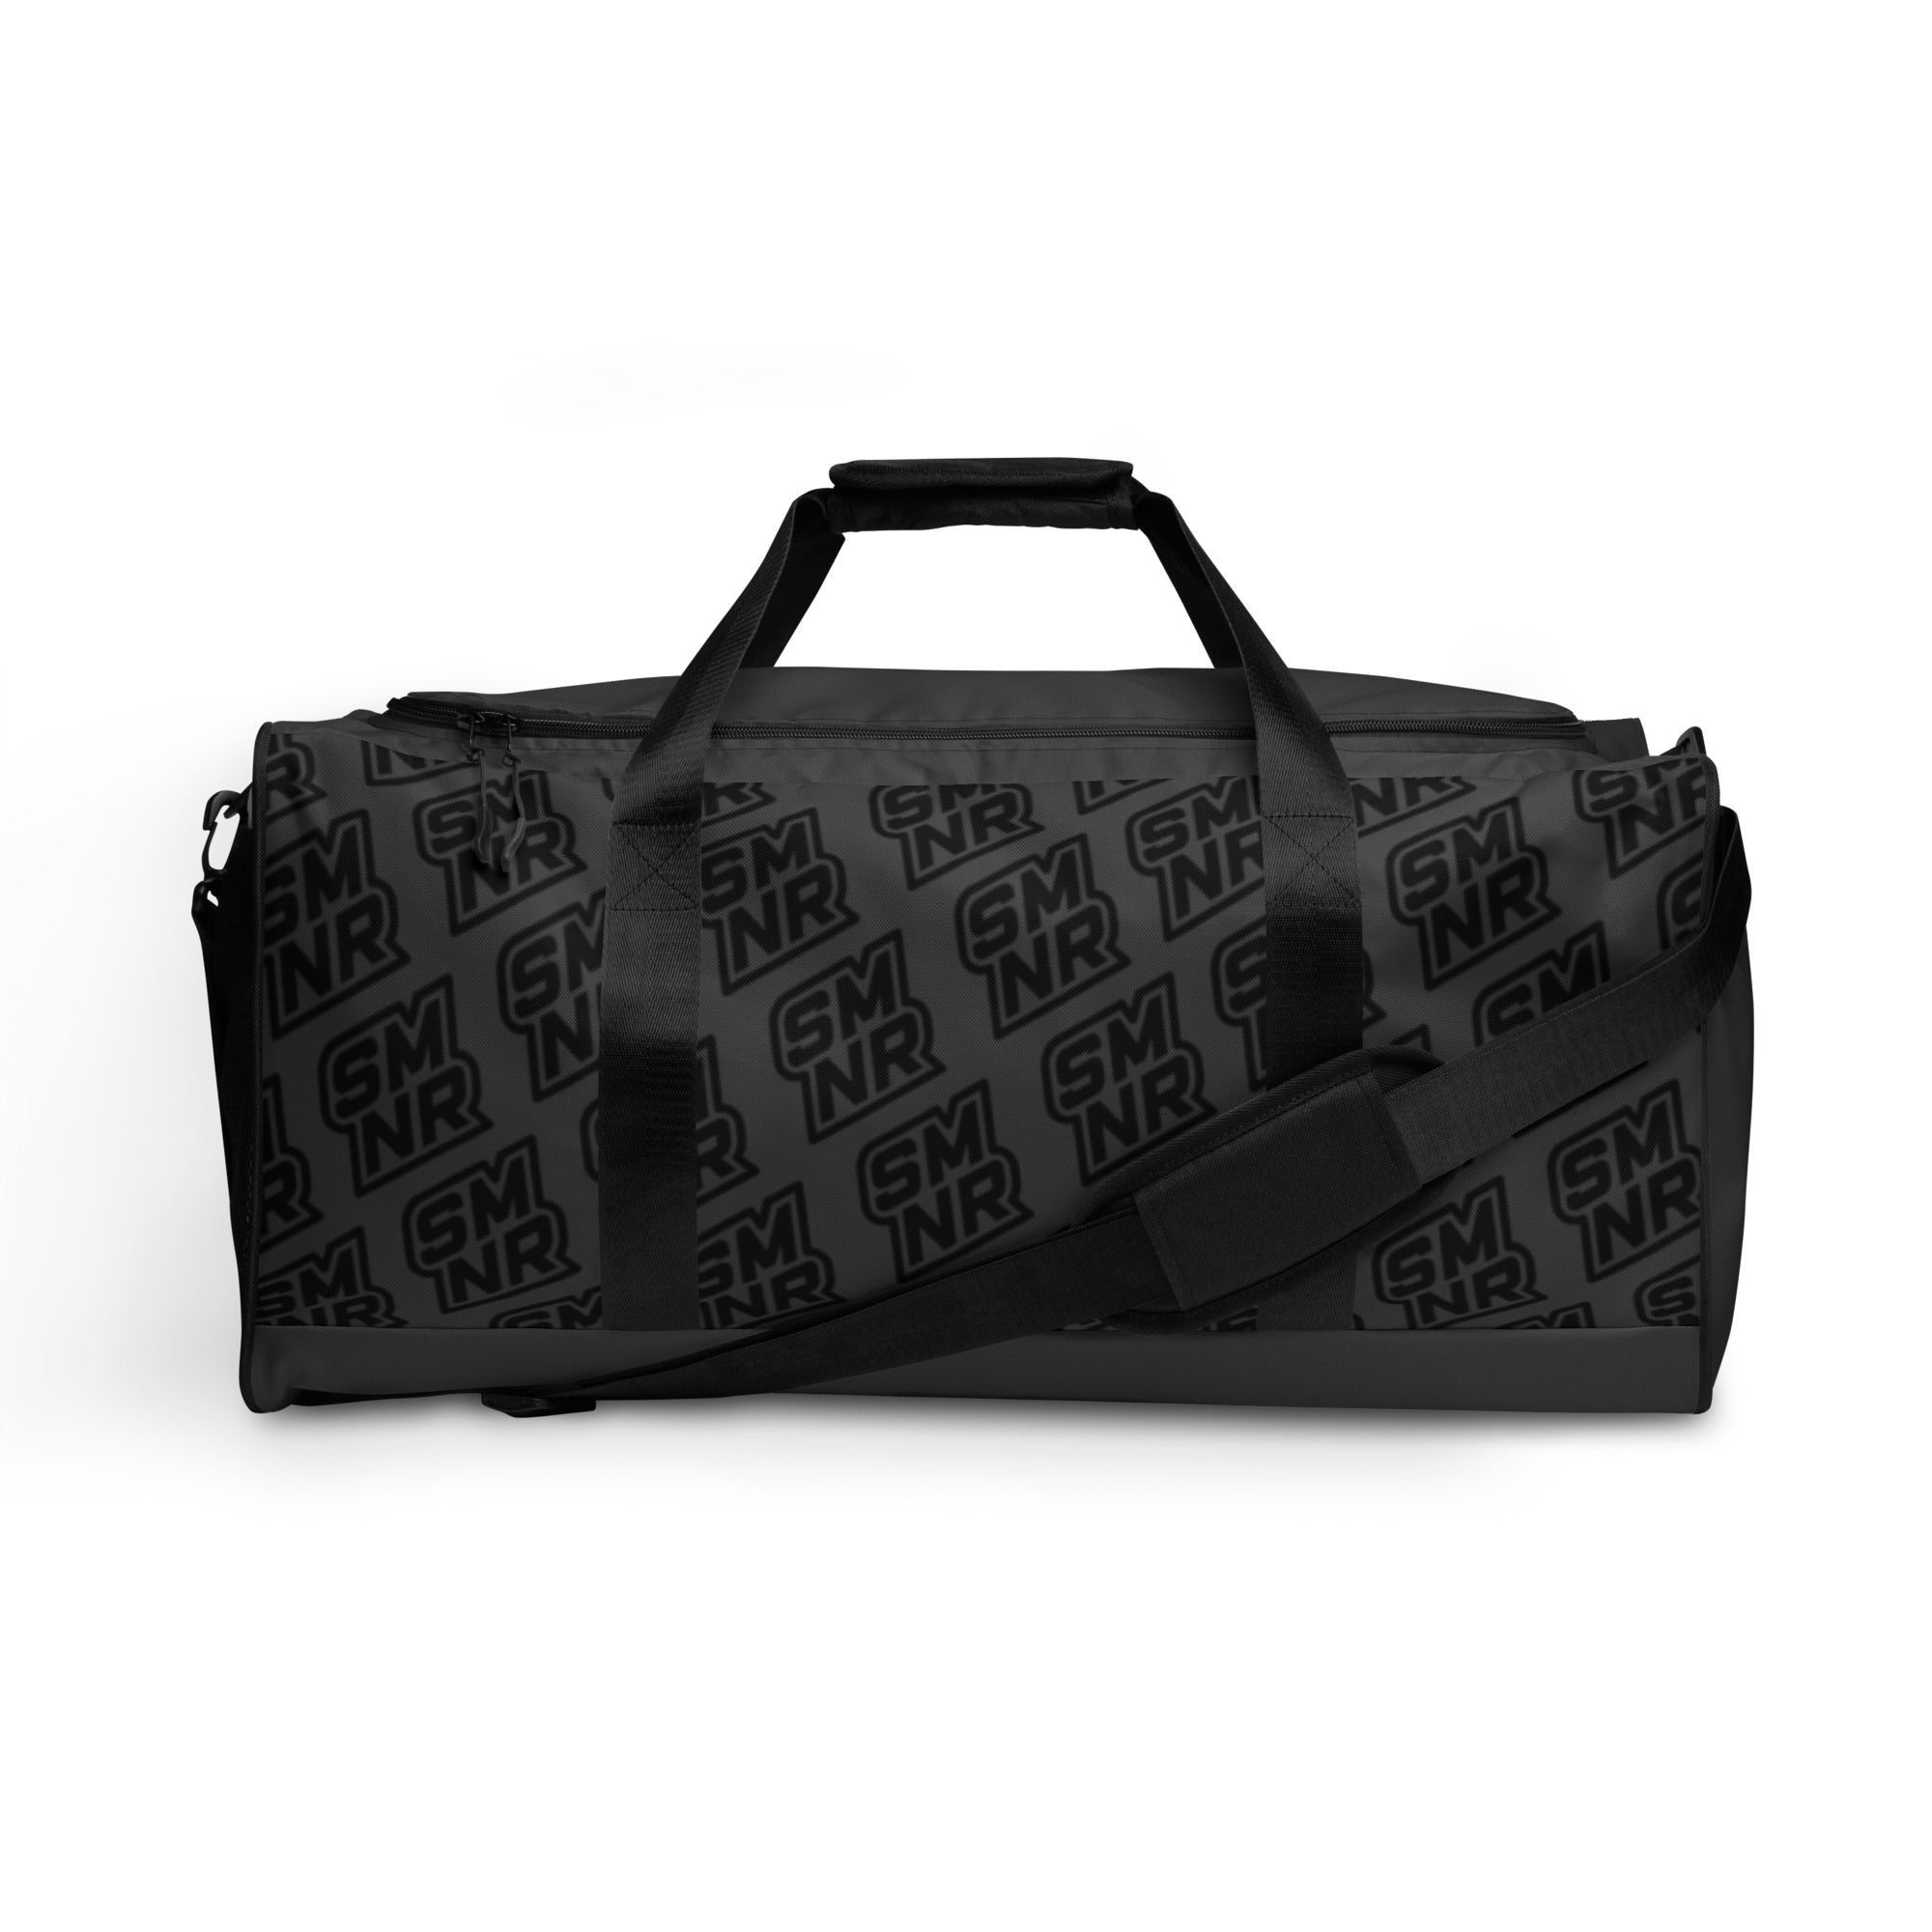 Shop Competition Dance Bags at DanceSupplies.com | Fast Shipping!